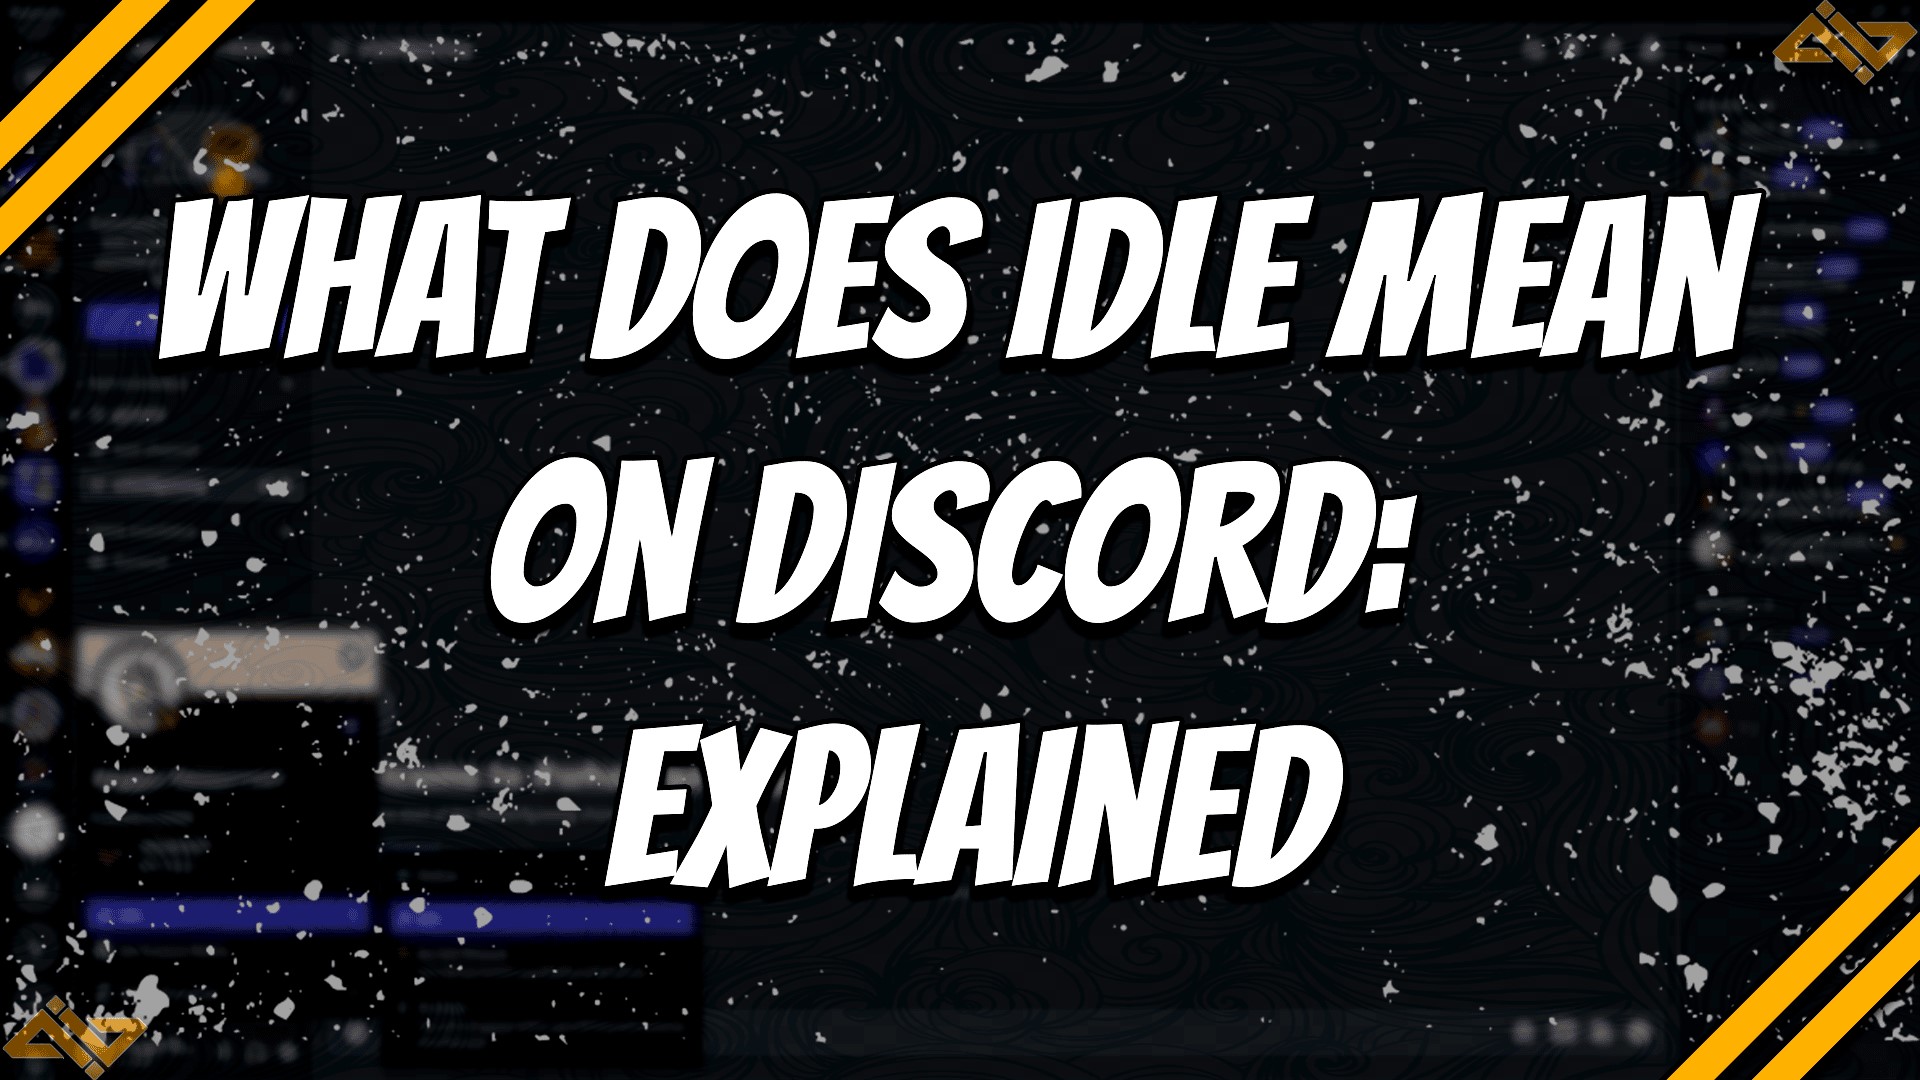 What Does Idle Mean in Discord